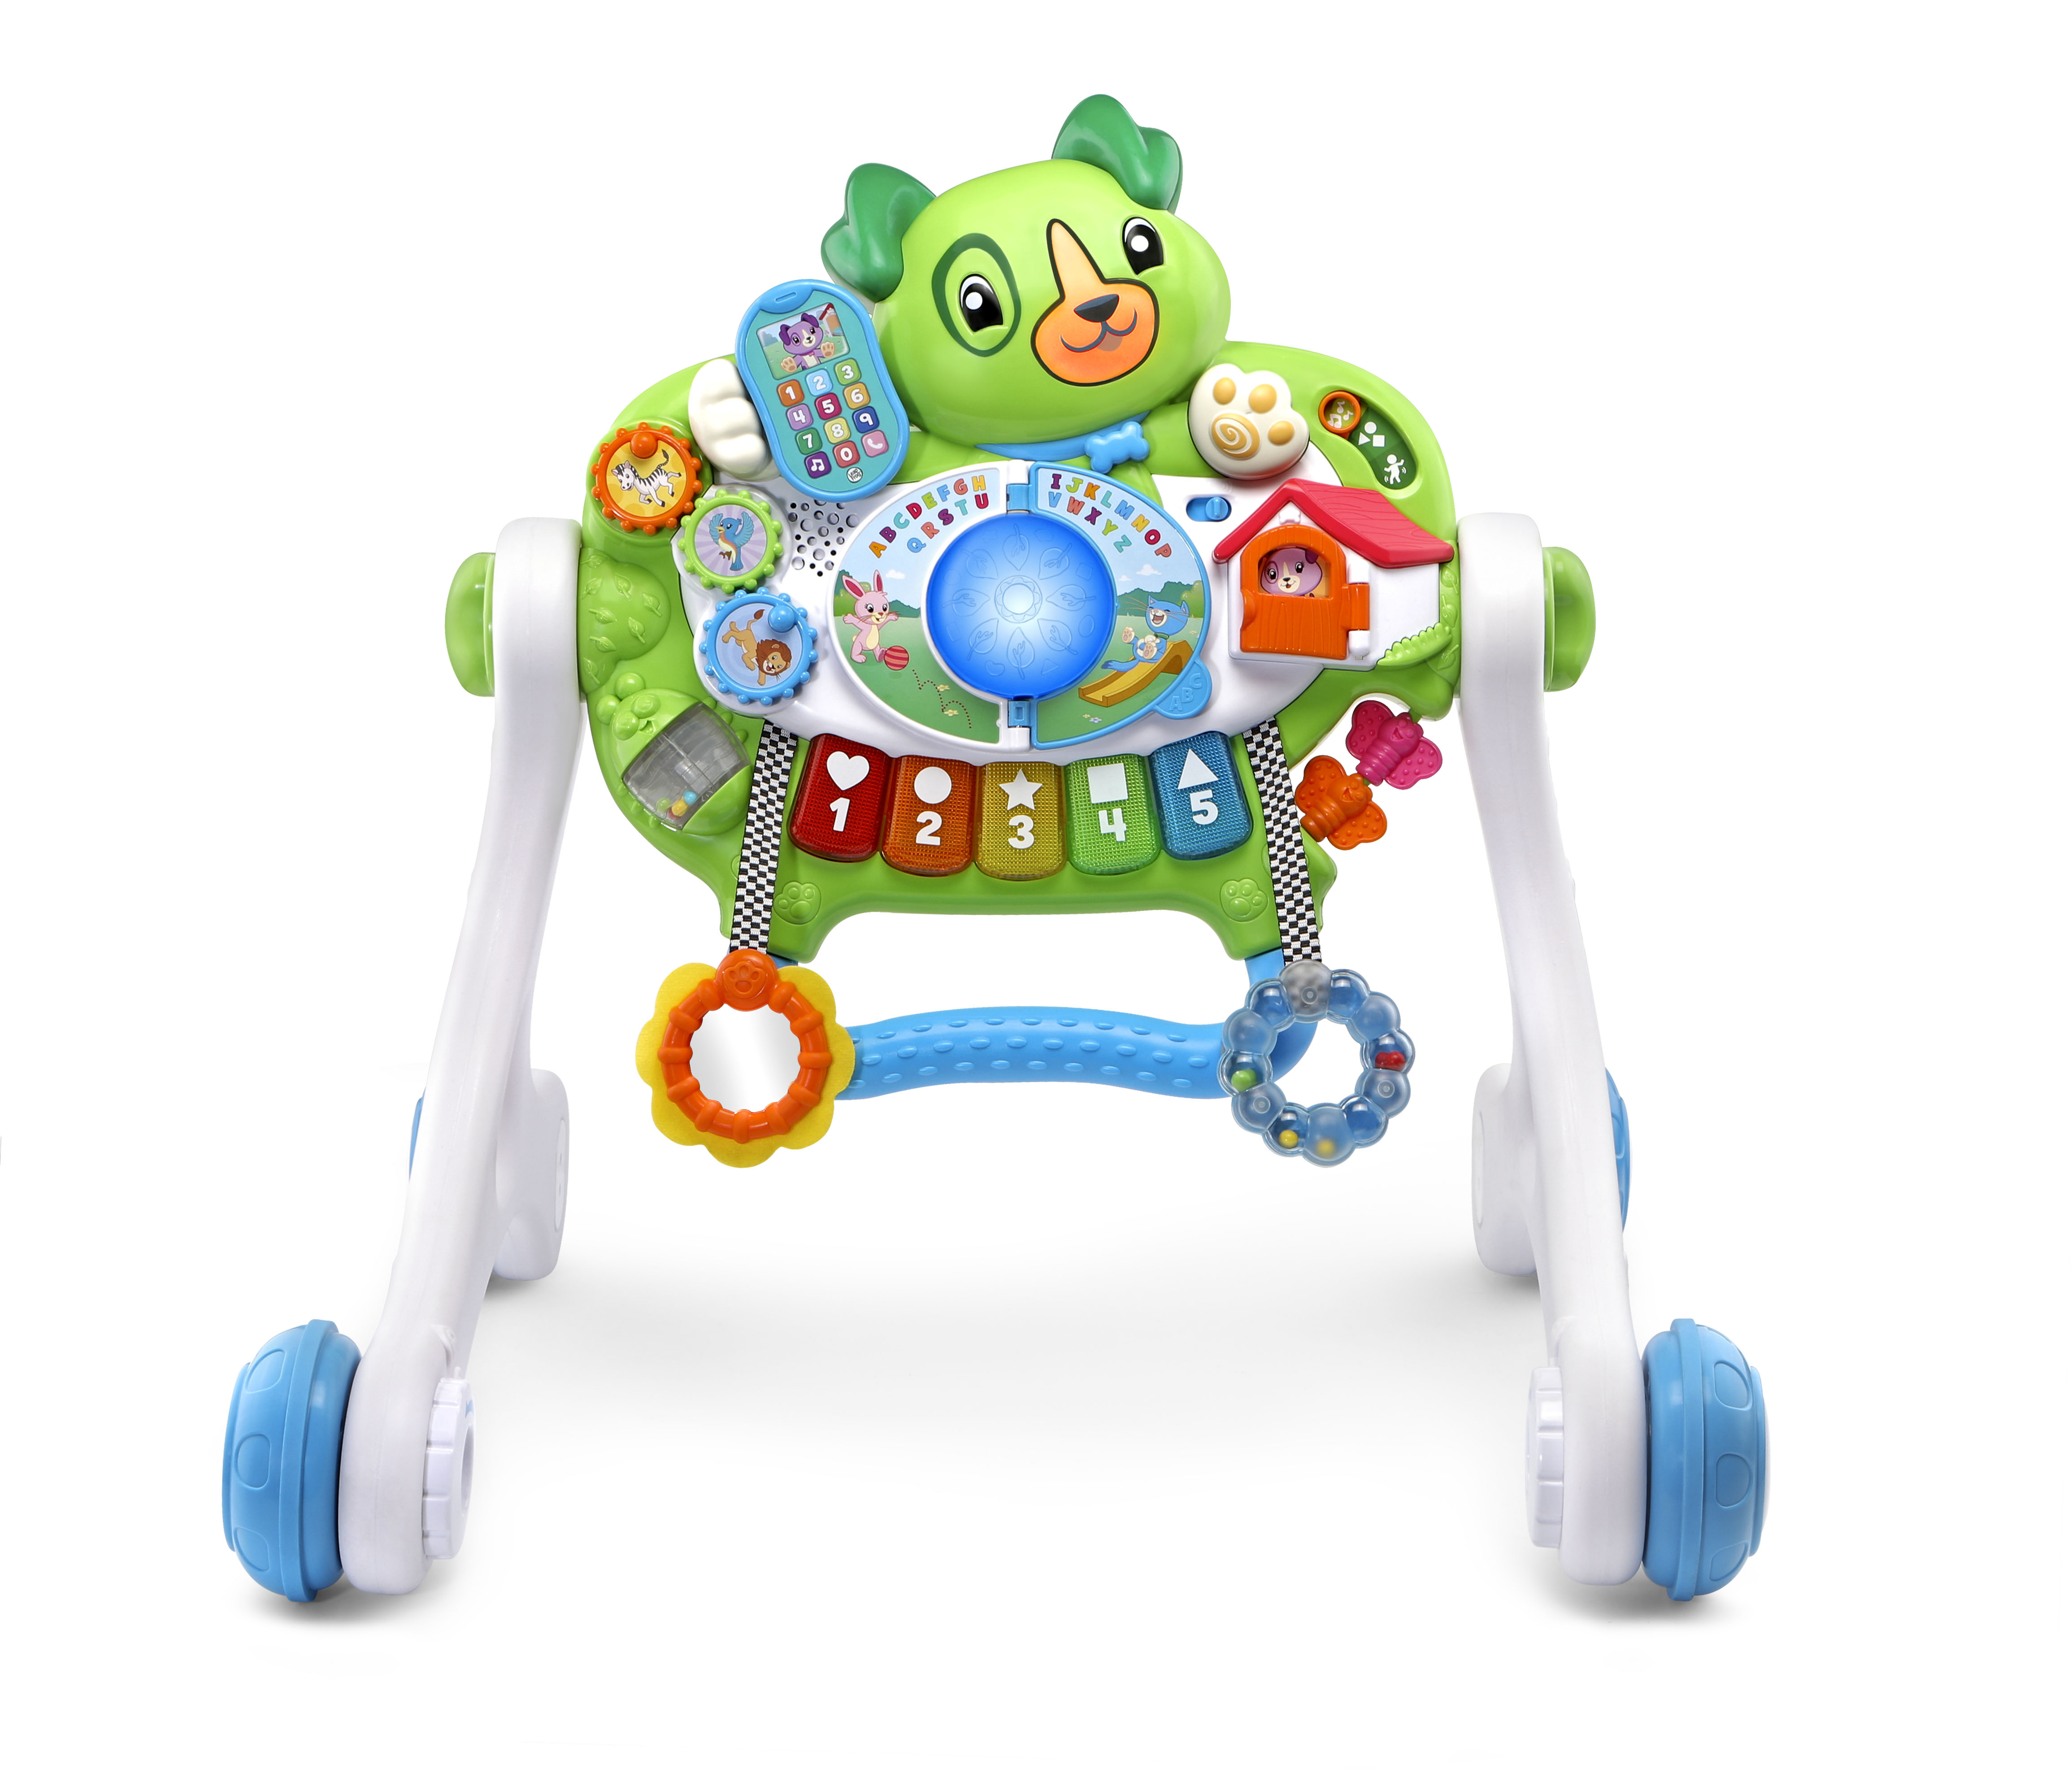 Scout's 3-in-1 Get Up and Go Walker, Baby Gym, Floor Play Toy, Green - image 6 of 11